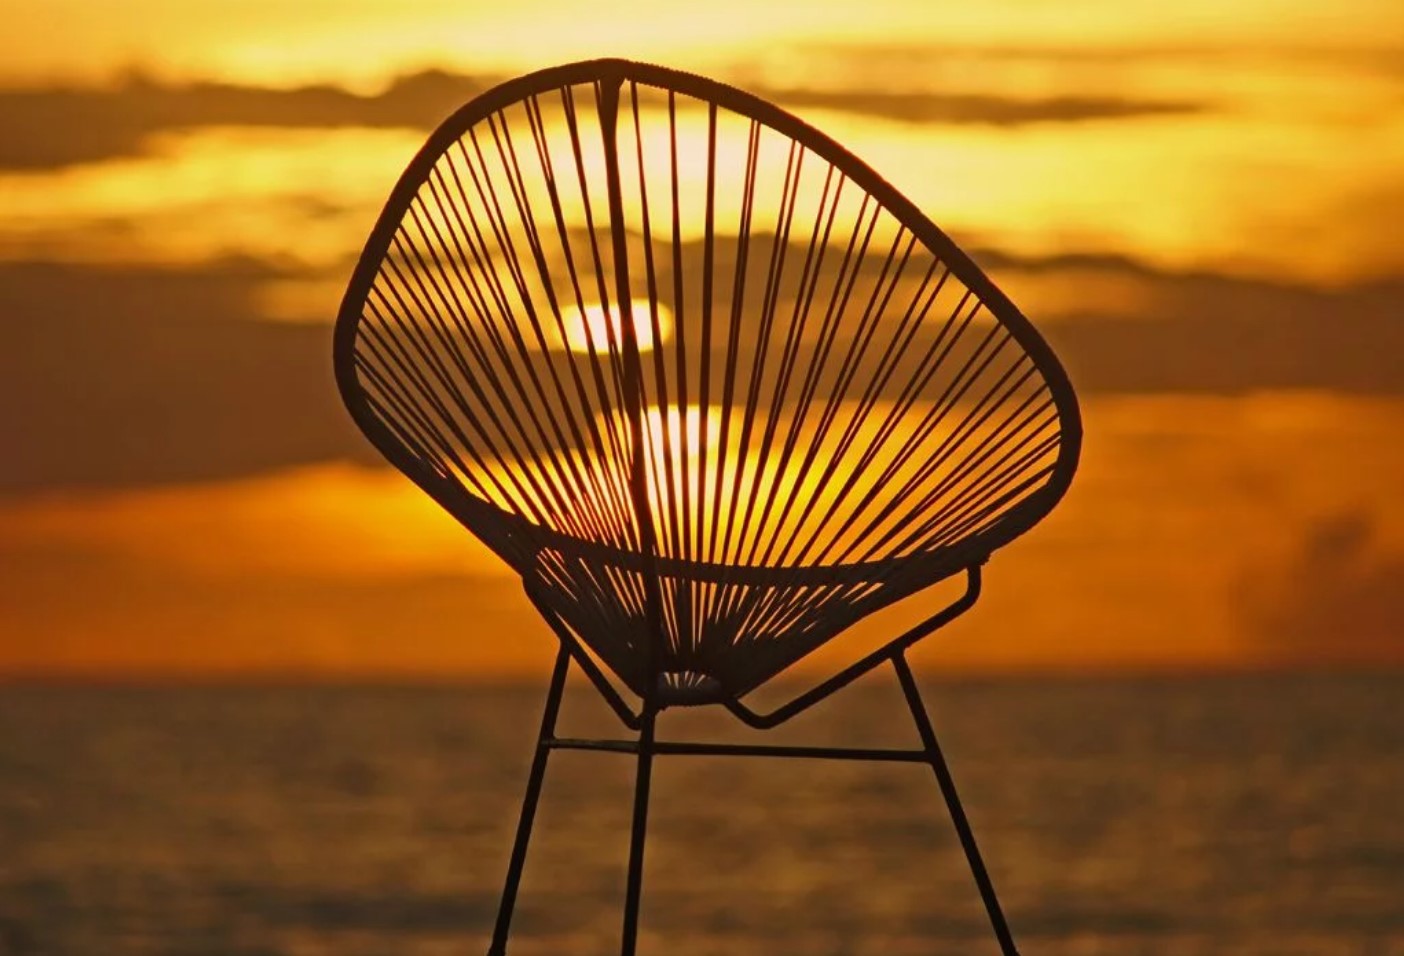 acapulco chair in sunset